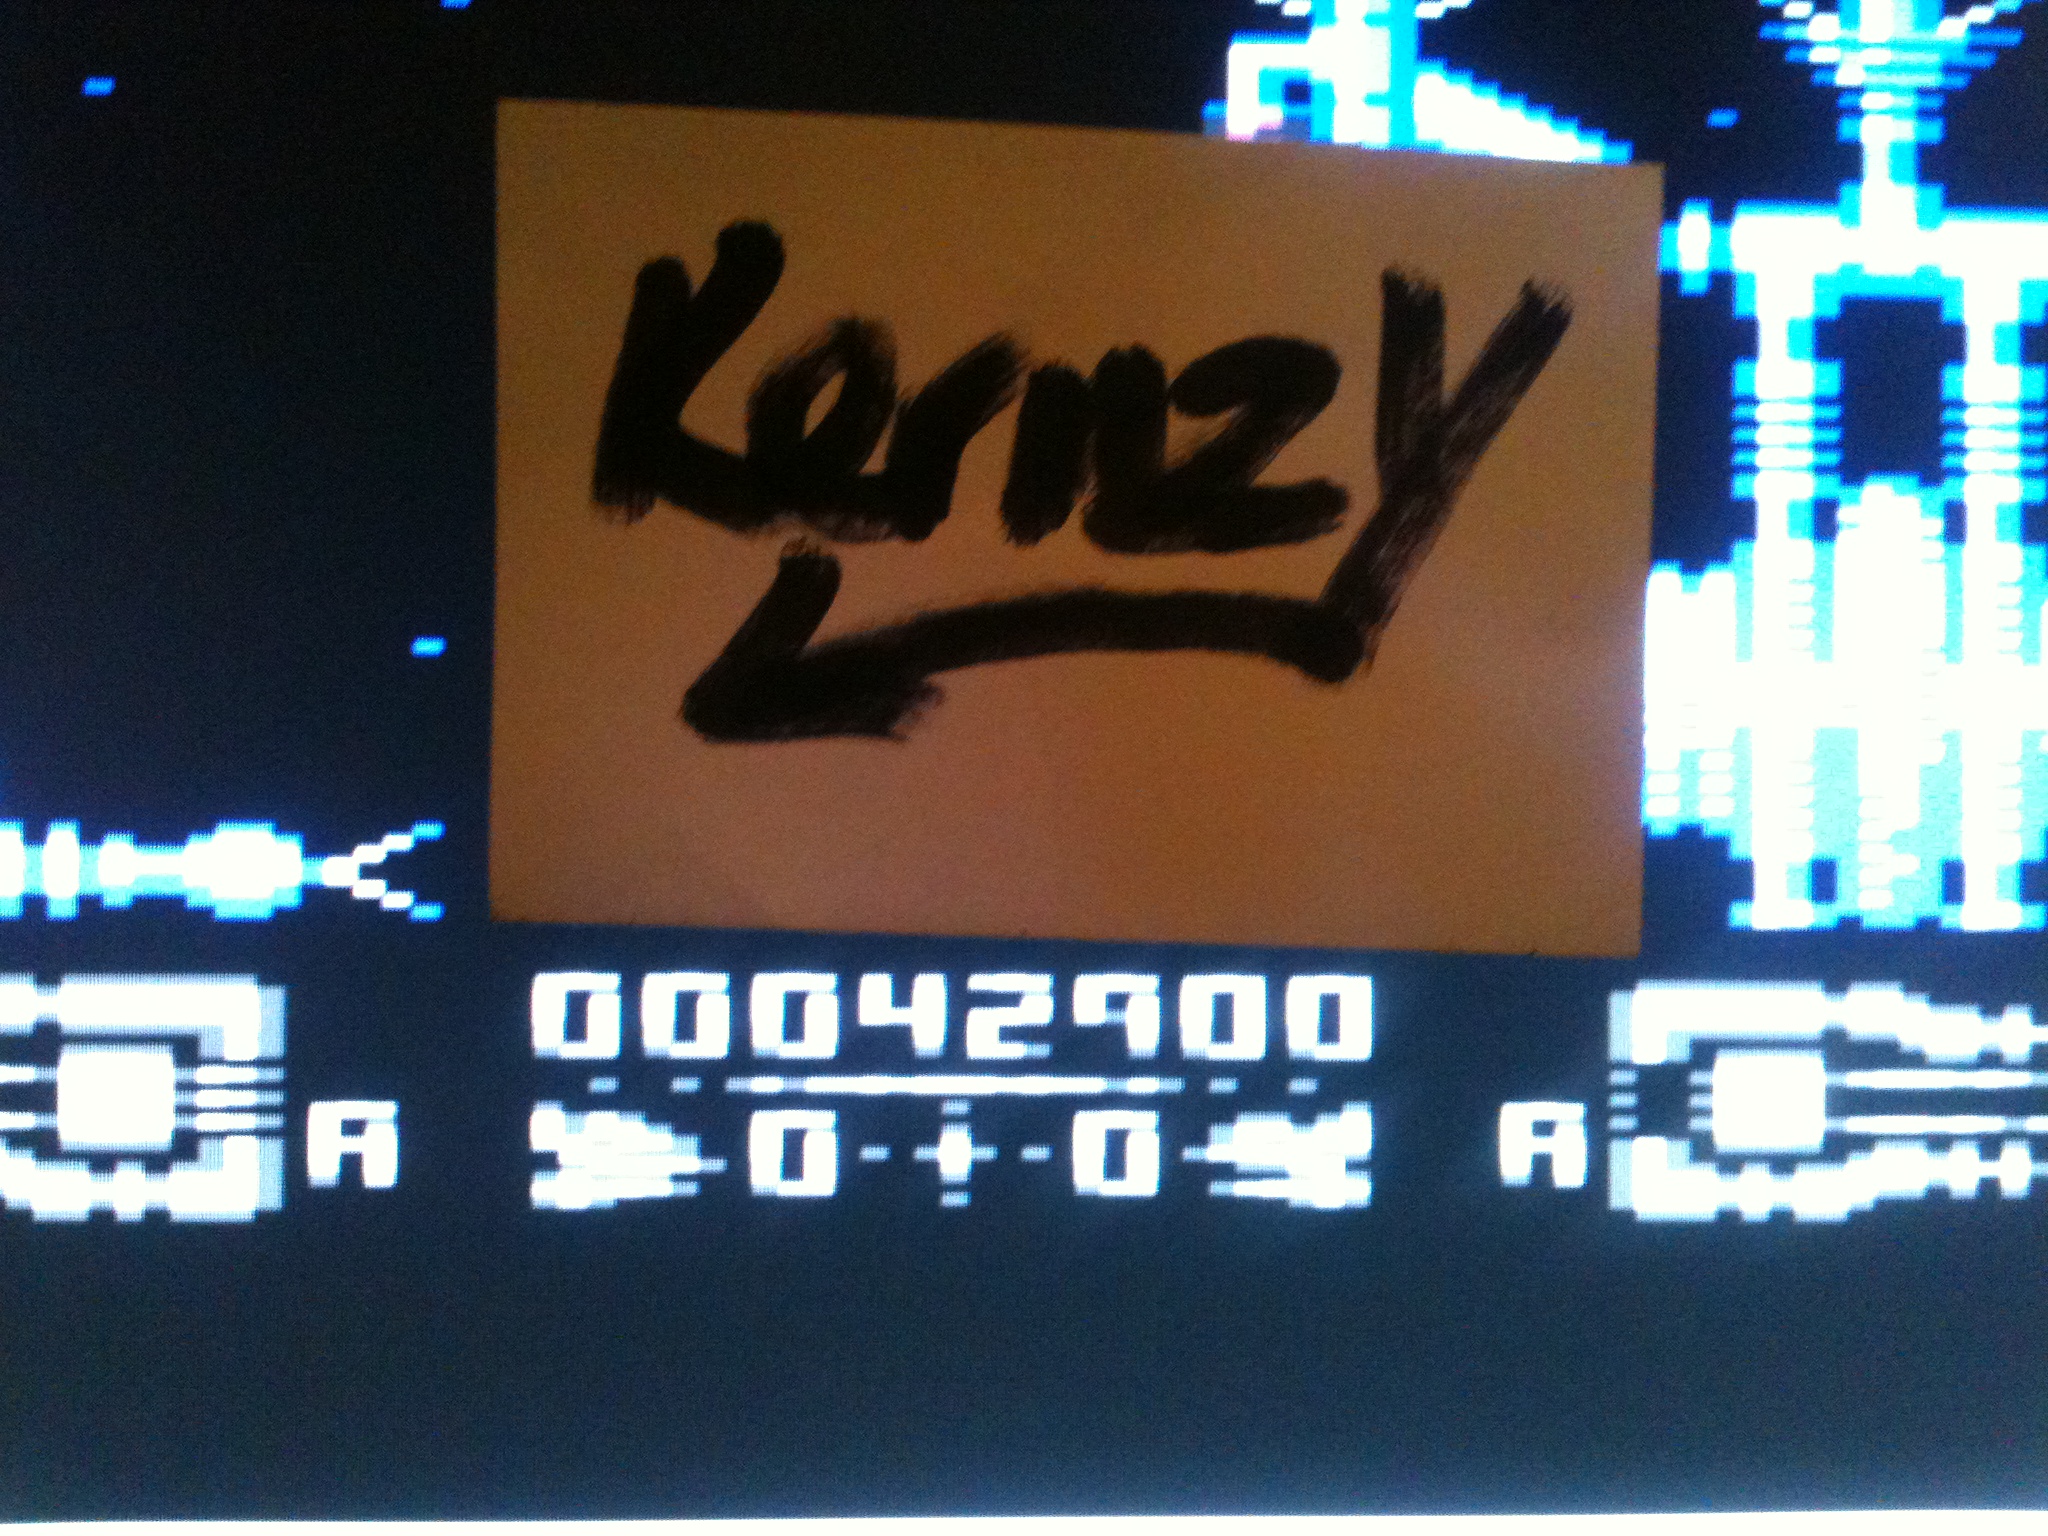 kernzy: Armalyte (Commodore 64 Emulated) 42,900 points on 2015-05-07 18:25:34